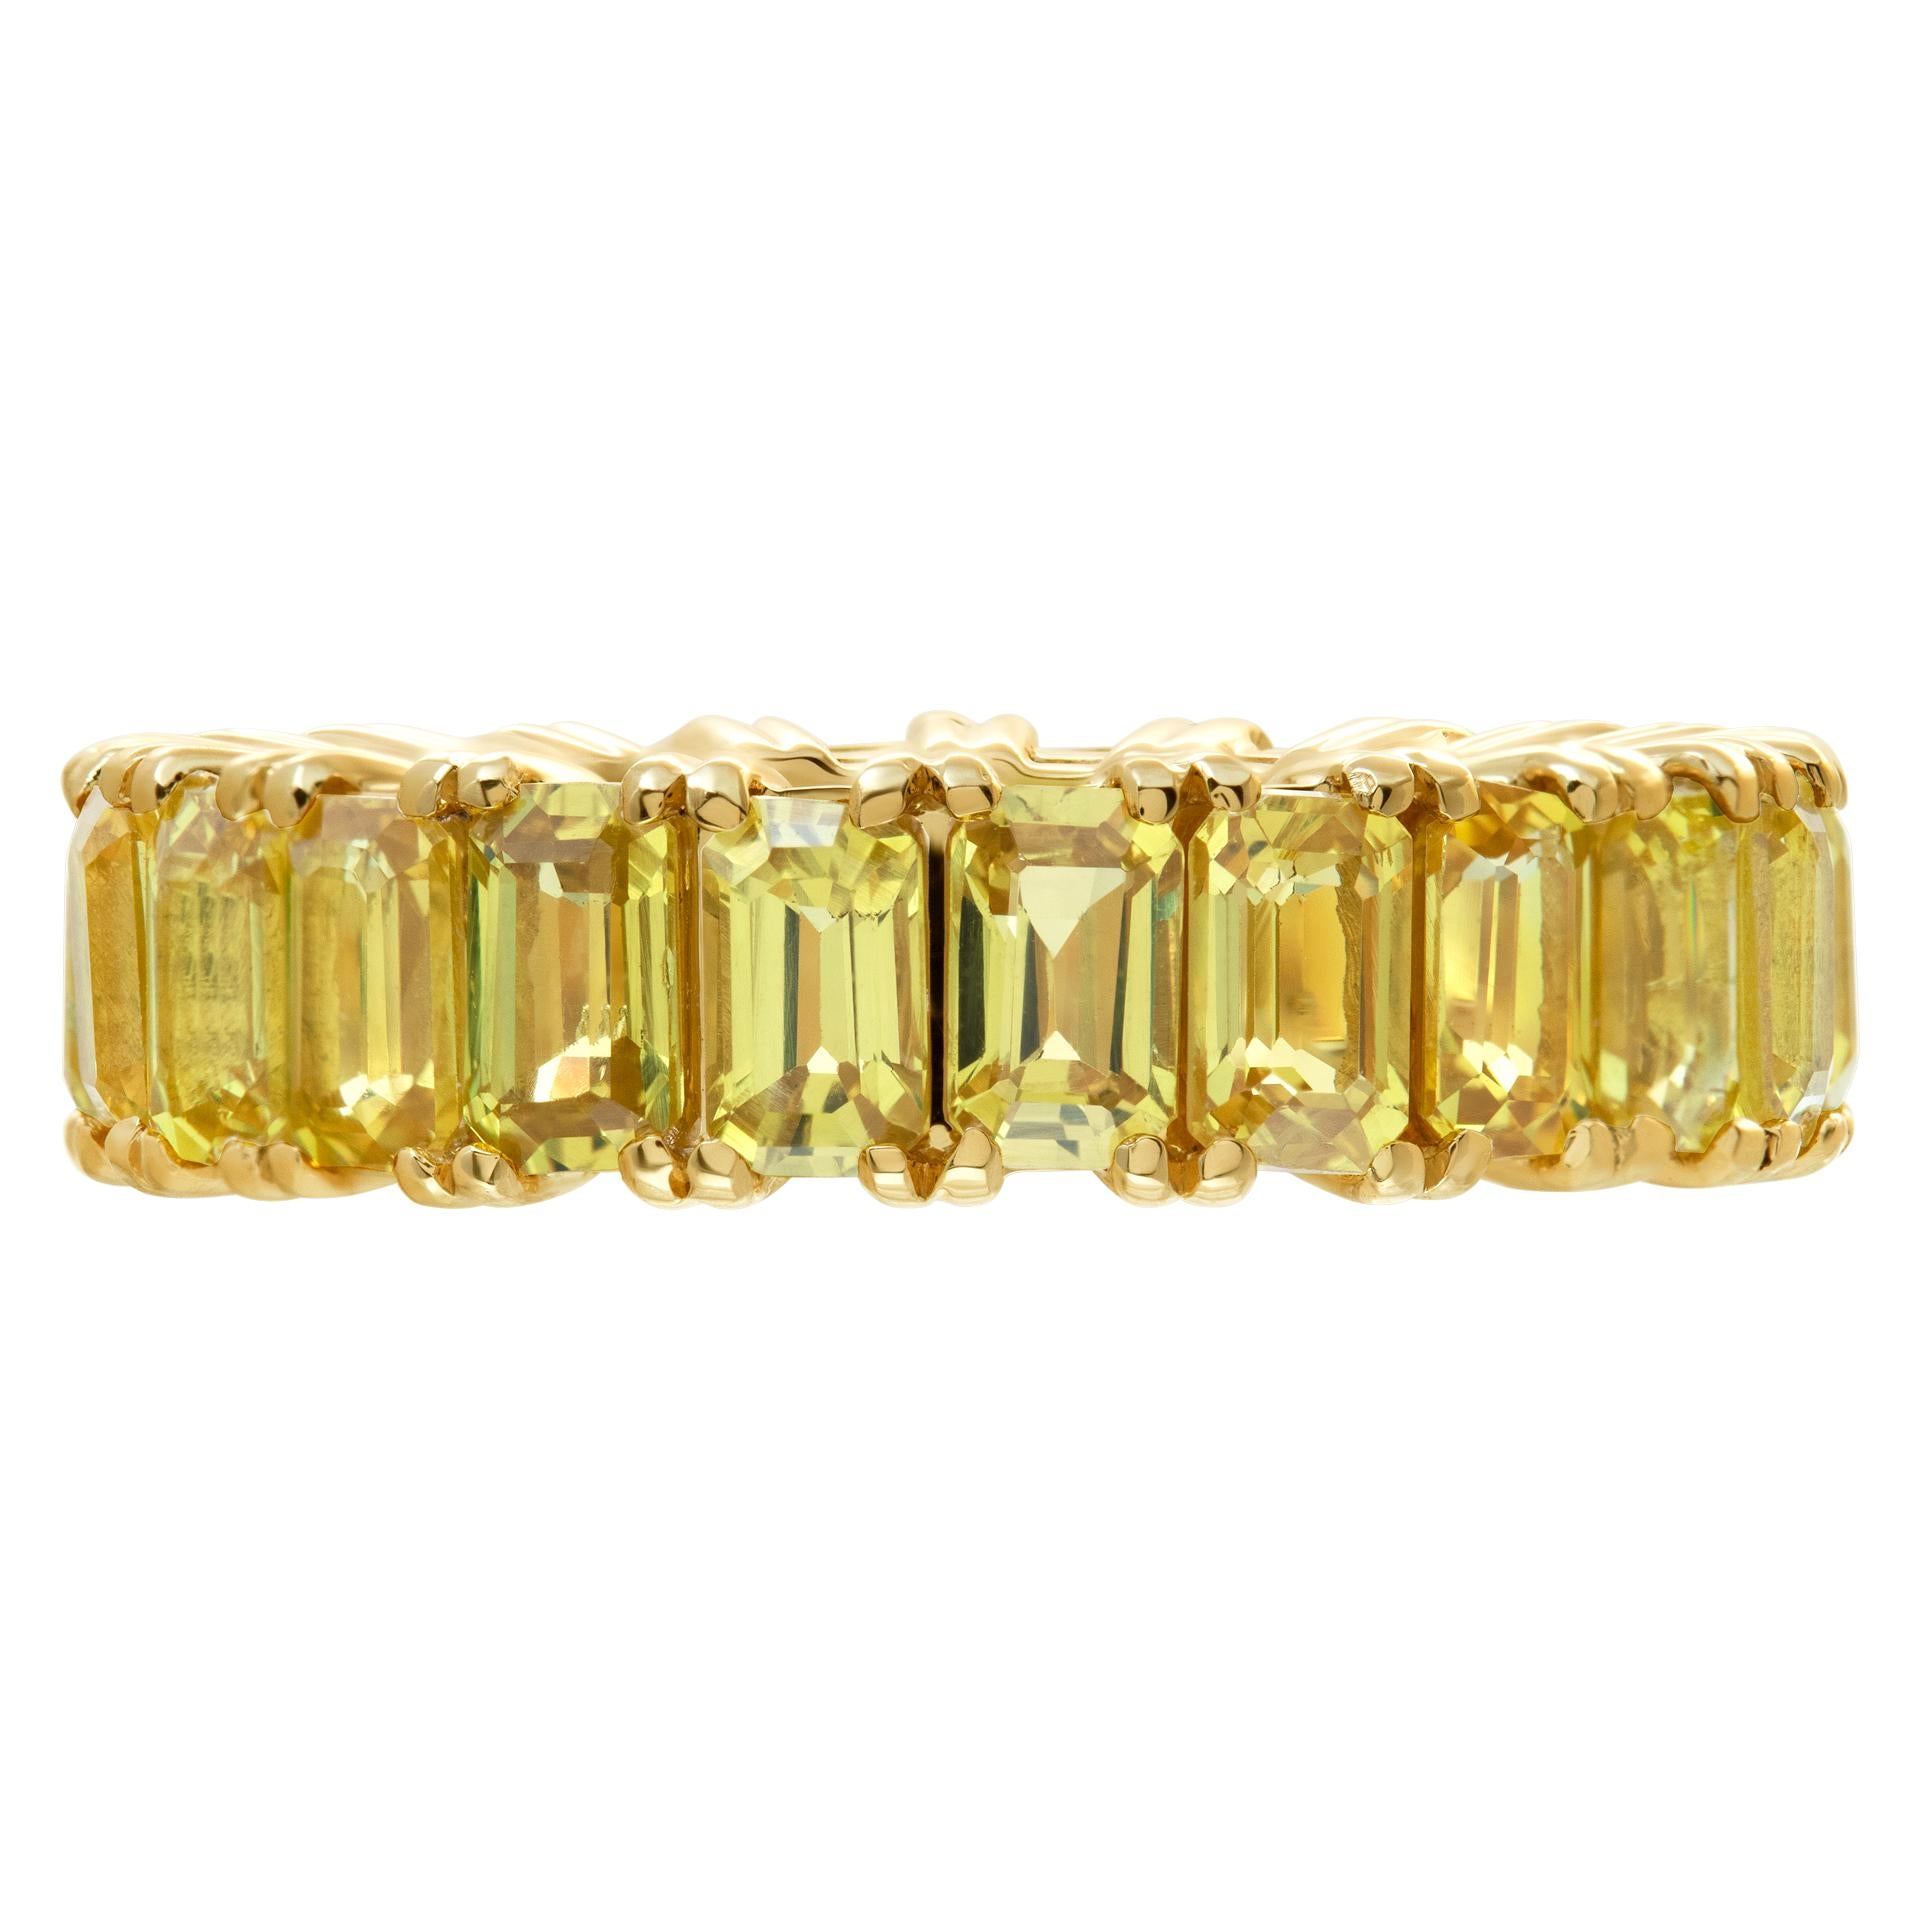 Yellow sapphire eternity band in 14k yellow gold with 7.60 carats in yellow sapphires. Size 7
